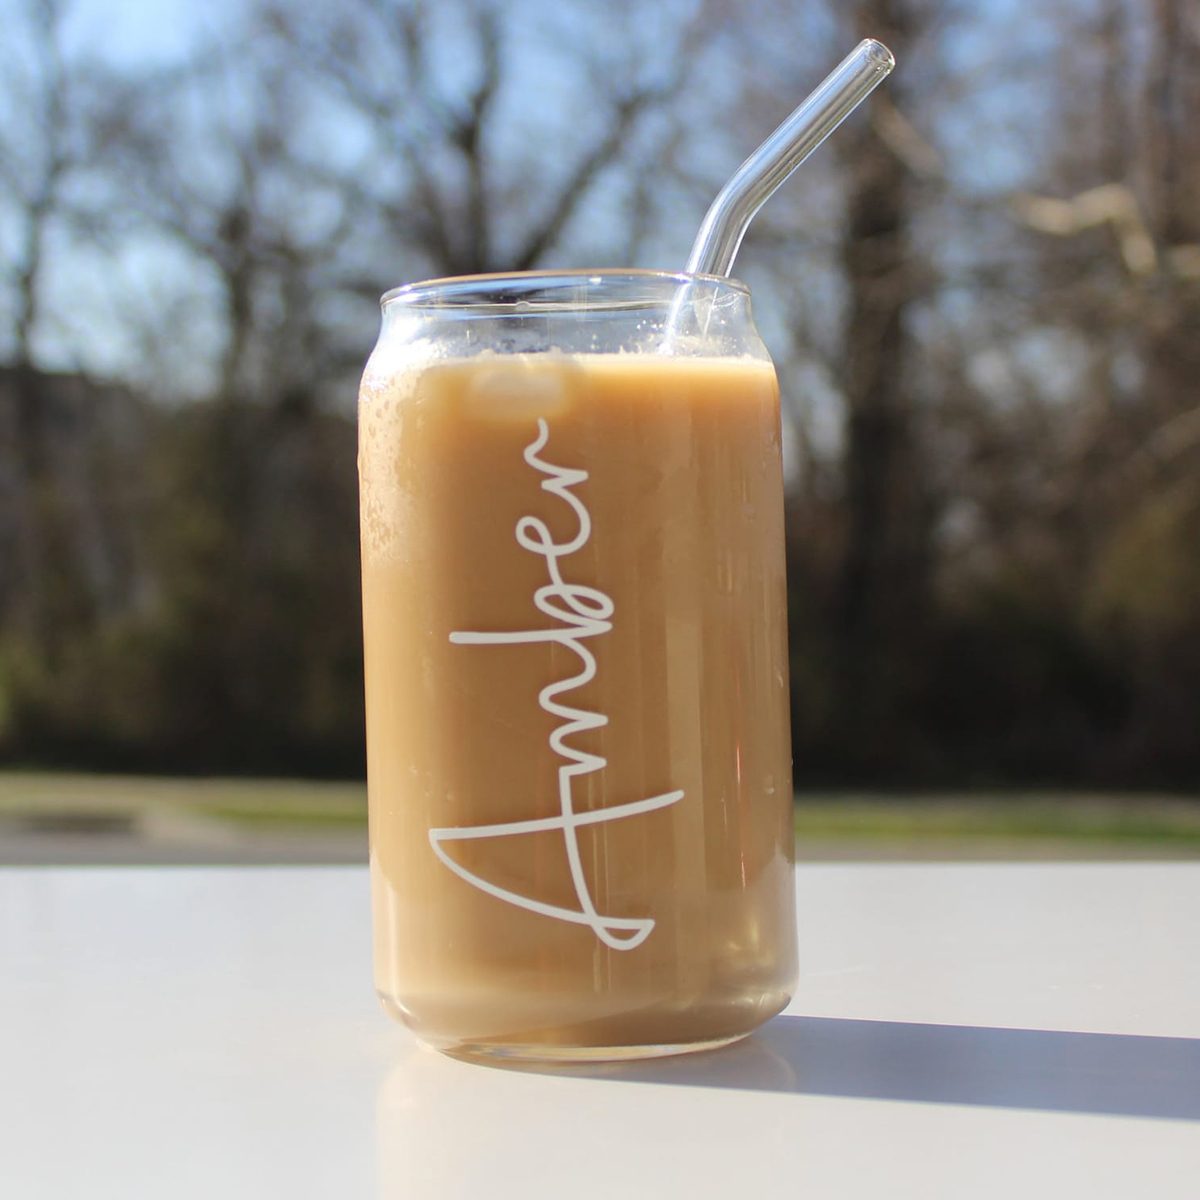 https://www.tasteofhome.com/wp-content/uploads/2023/04/Personalized-Iced-Coffee-Cup_ecomm_via-etsy.com_.jpg?fit=700%2C700